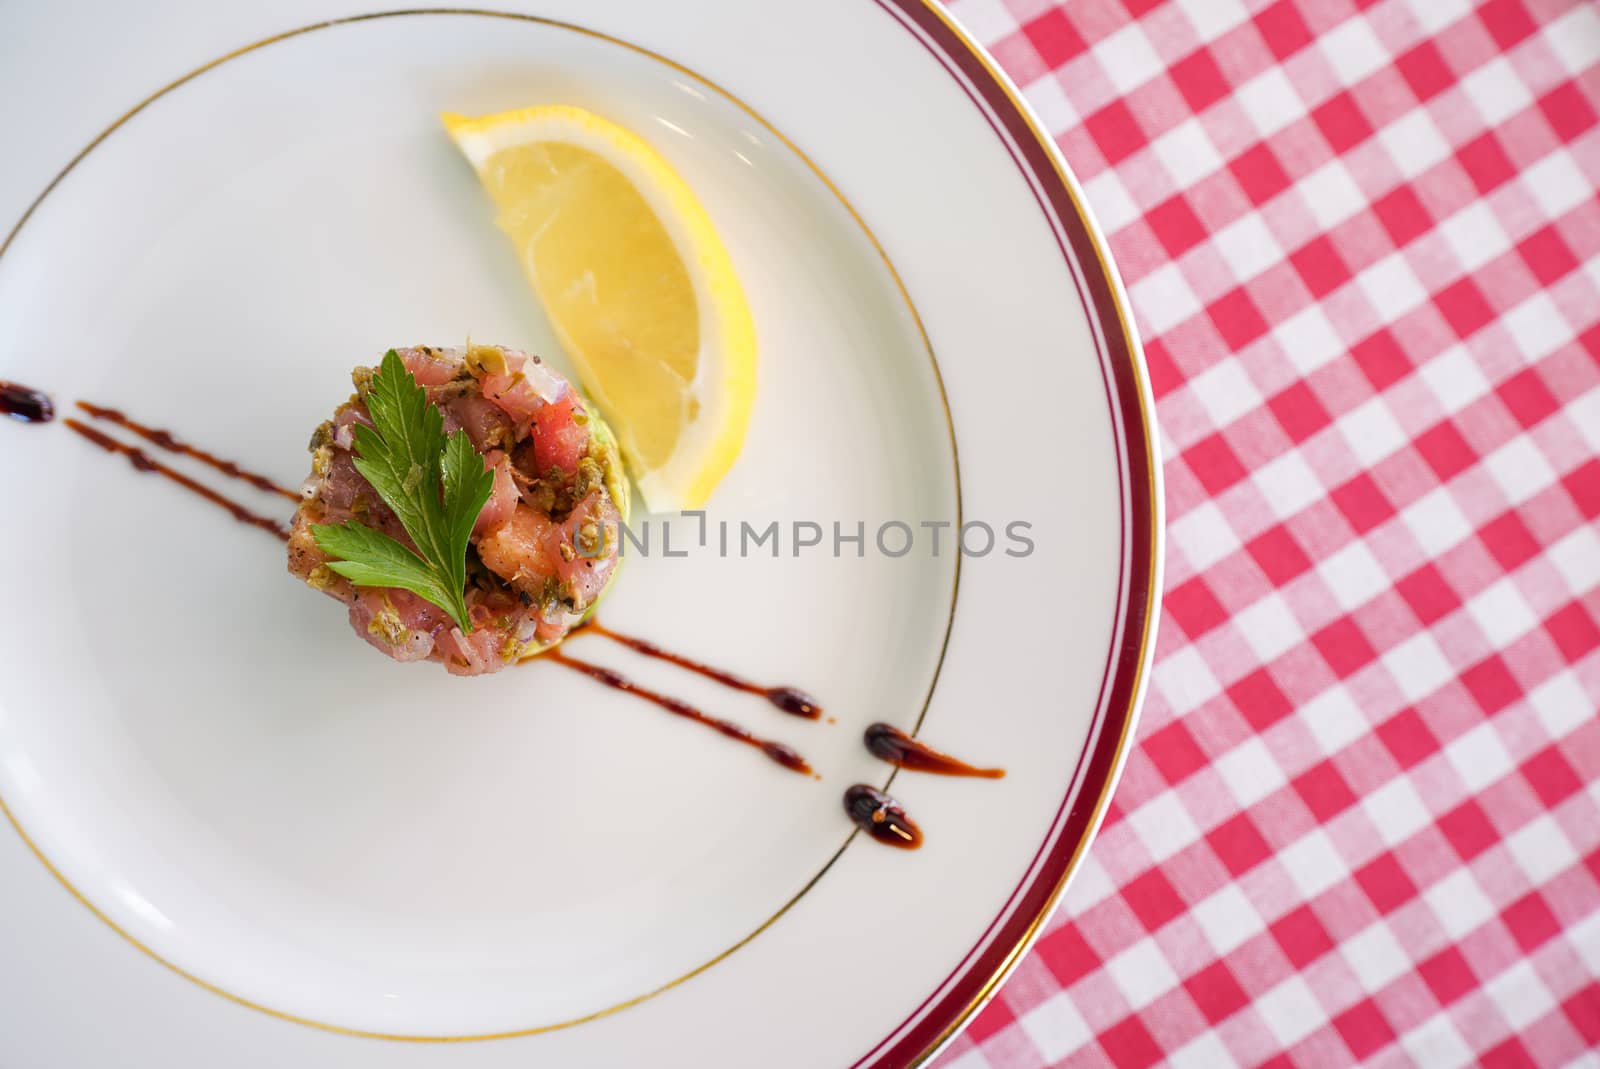 TARTARE DI TONNO O SALMONE. Finely diced tuna and salmon mixed with shallot, lemon juice, extra virgin olive oil and chopped herbs. Served with lettuce and balsamico reduction